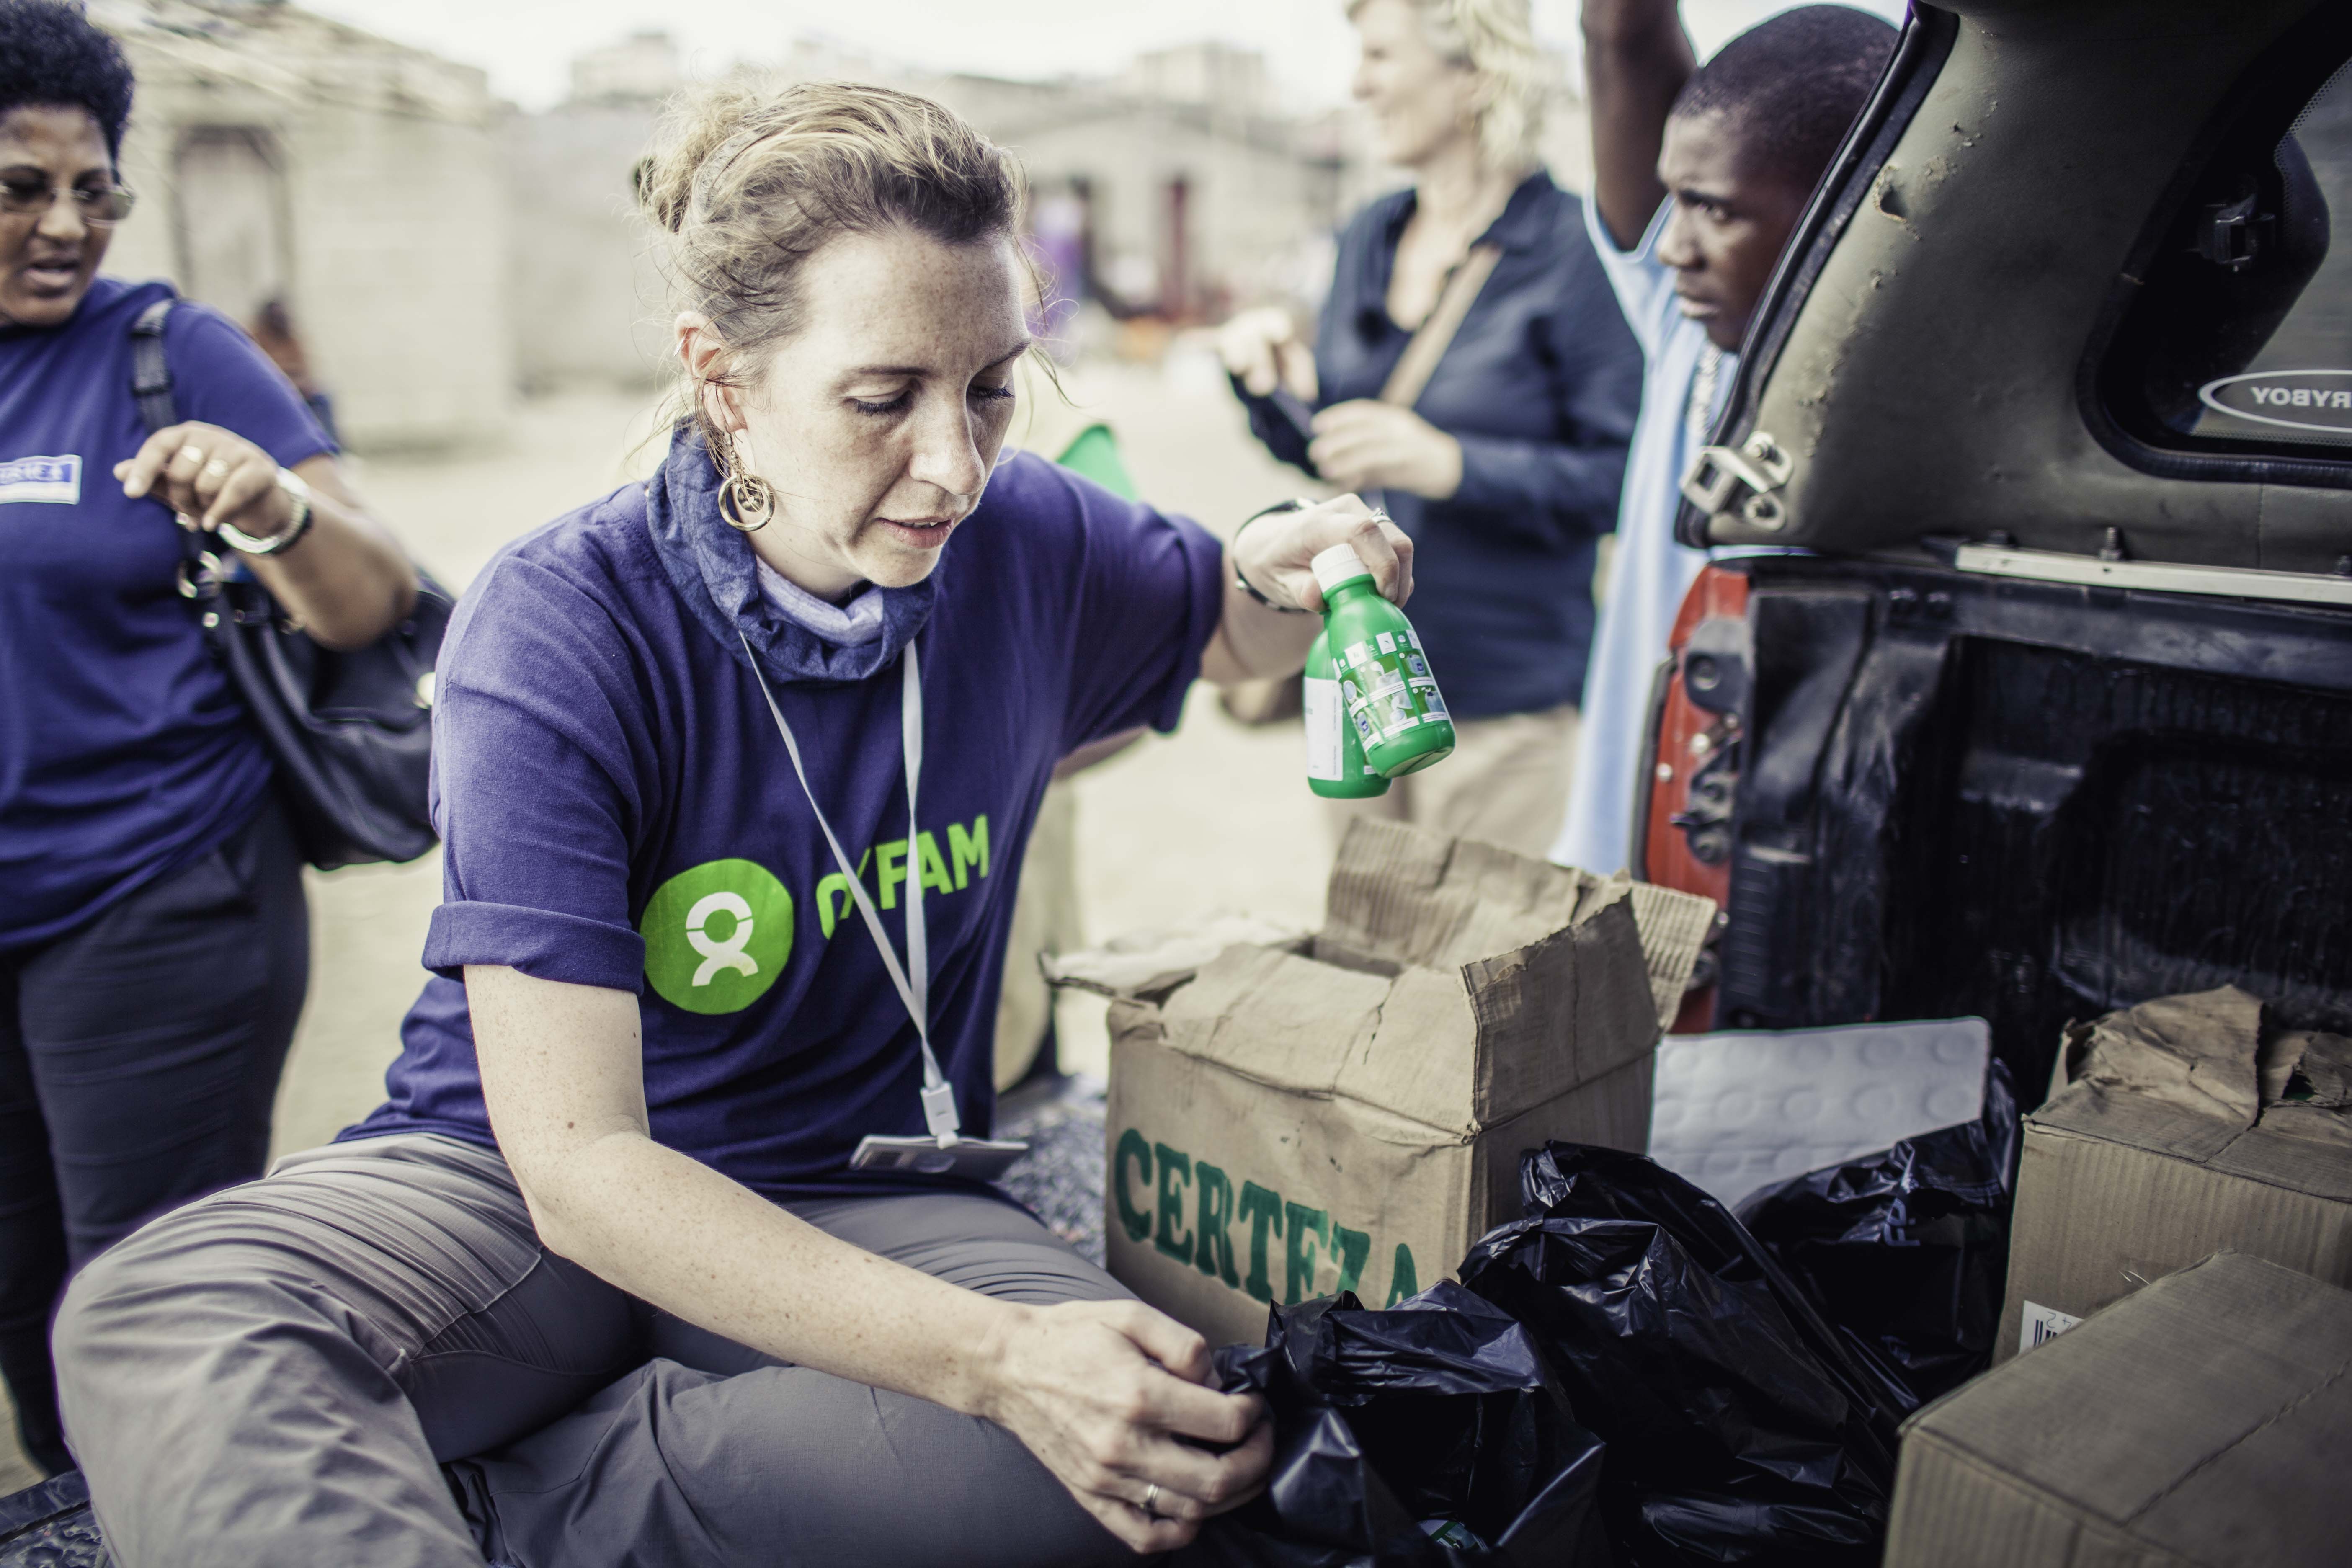 Michelle, a public health promotion advisor, packing chlorine bottles for households in Mozambique. One drop will disinfect a jerry can of 20 litres of water. (Photo: Micas Mondlane / Oxfam Novib)